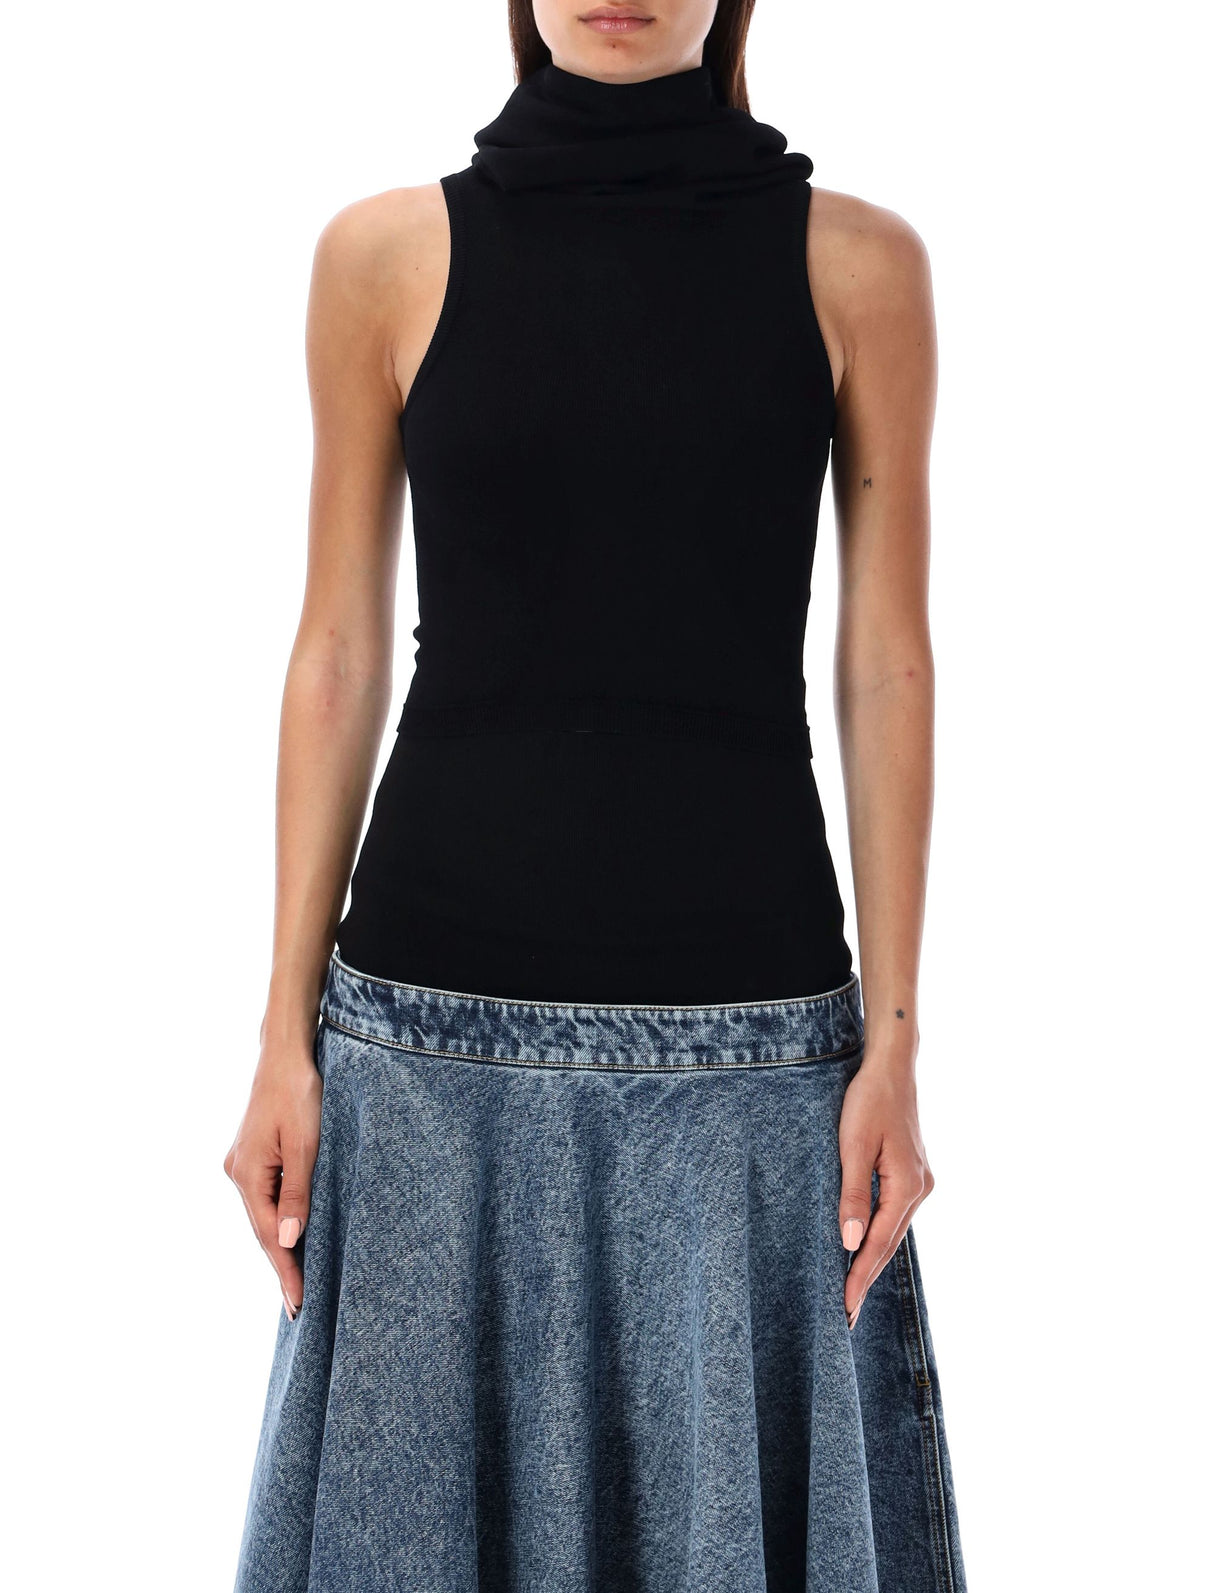 ALAIA Sleek and Edgy Black Hooded Crop Top for Women